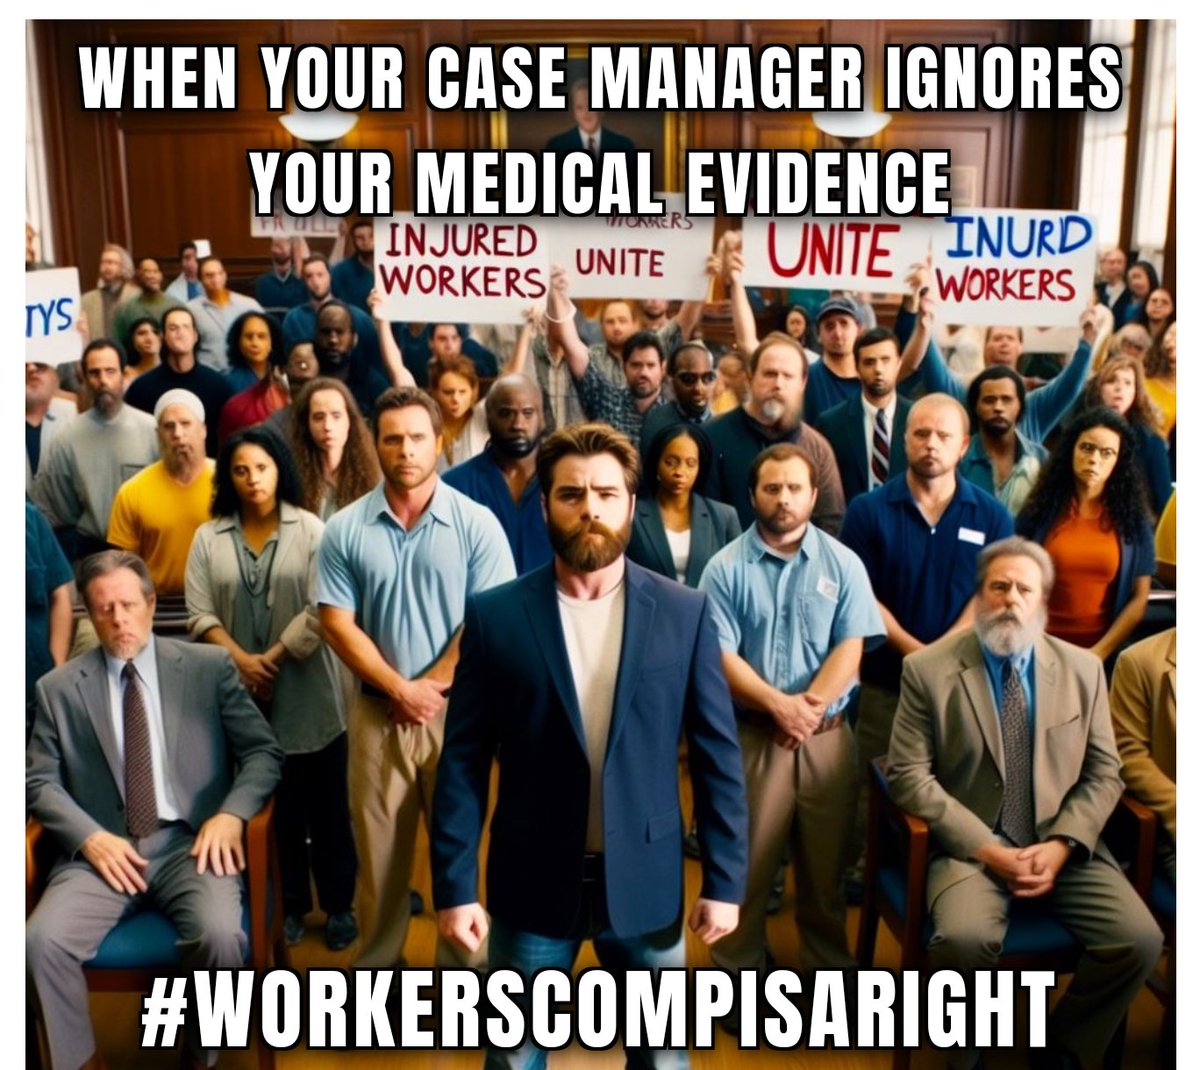 When your case manager ignores your medical evidence, leaving you permanently disabled without help, stuck in appeals, and resorting to the Human Rights Tribunal for justice. #WorkersCompIsARight #InjuredWorkers #HumanRights